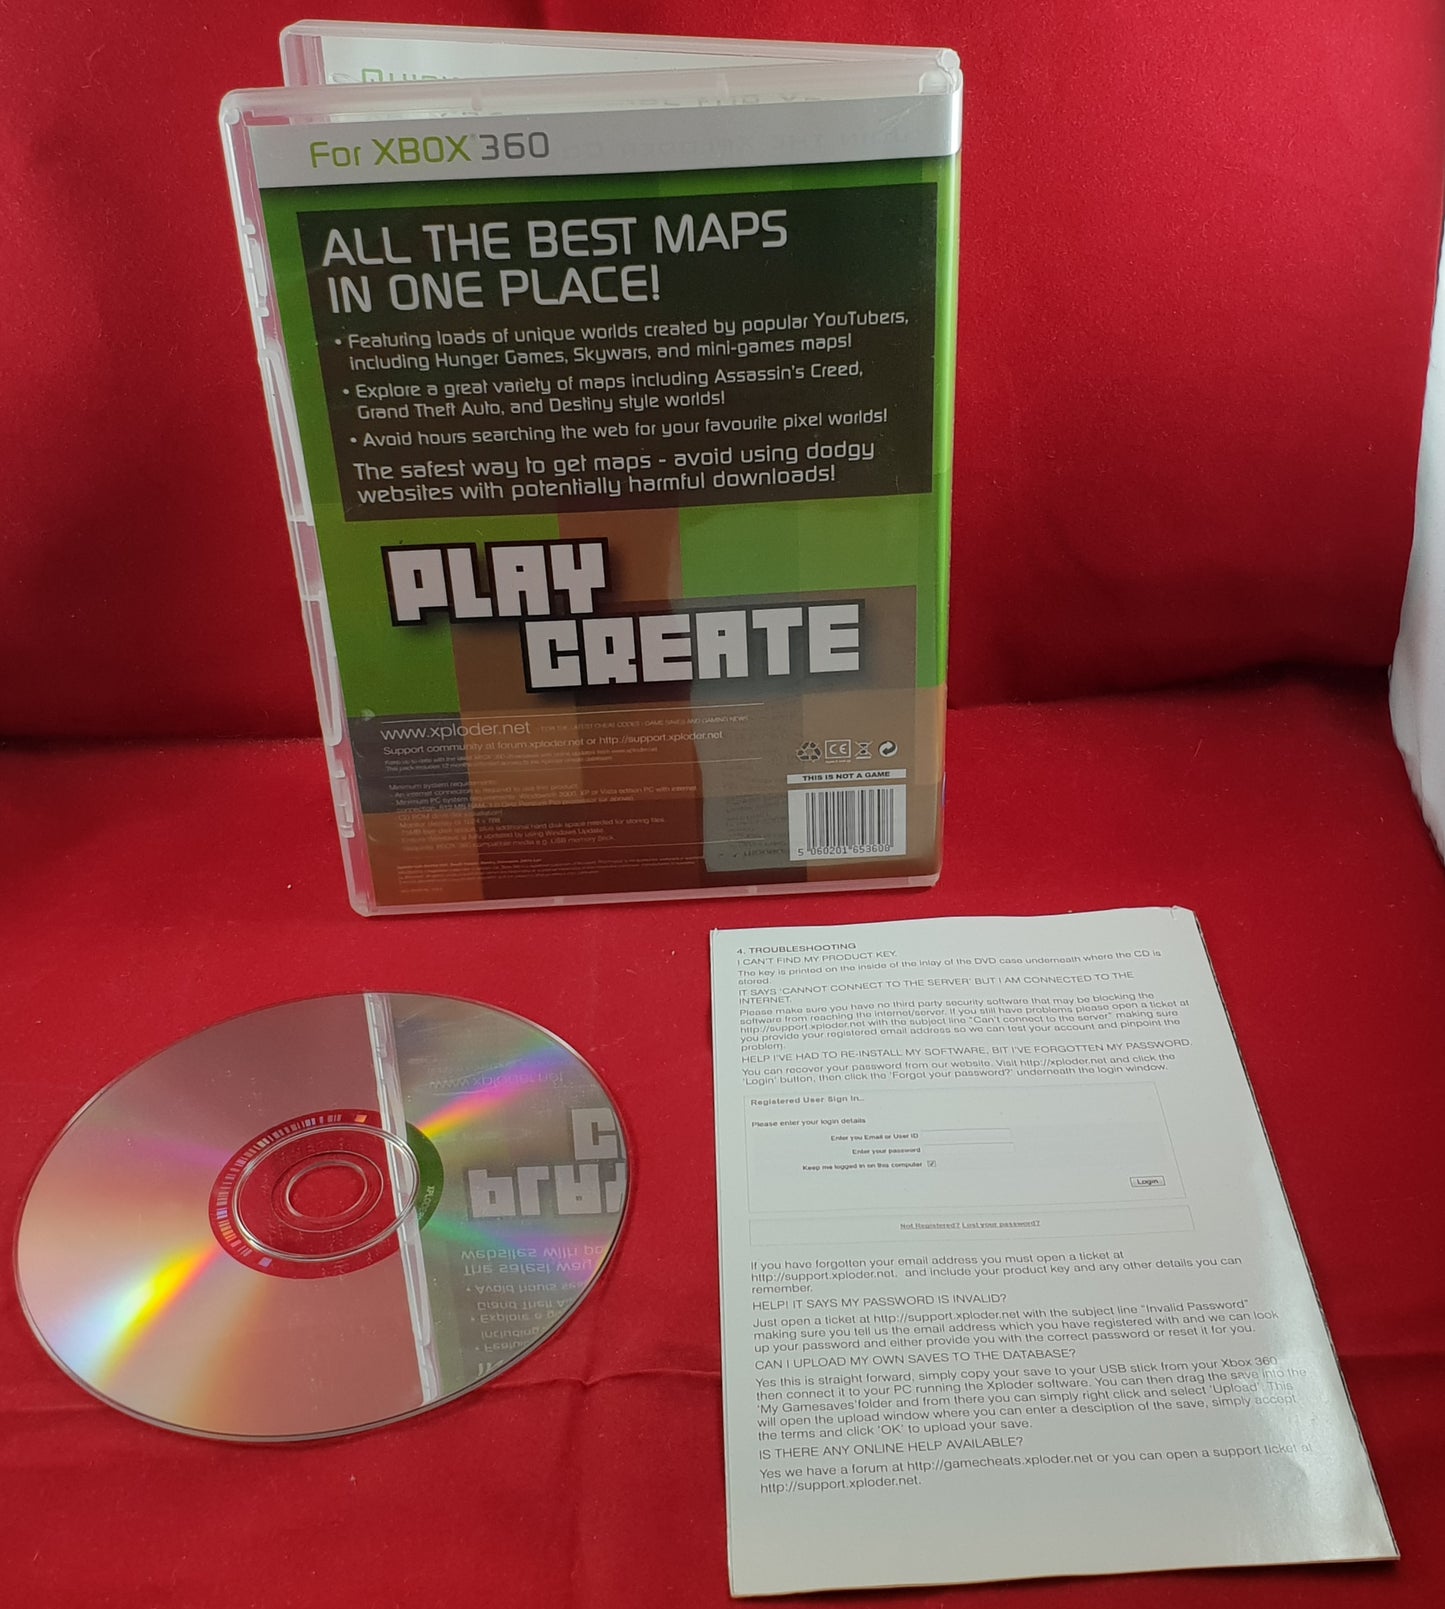 Xploder Cheats Special Edition for Minecraft Microsoft Xbox 360